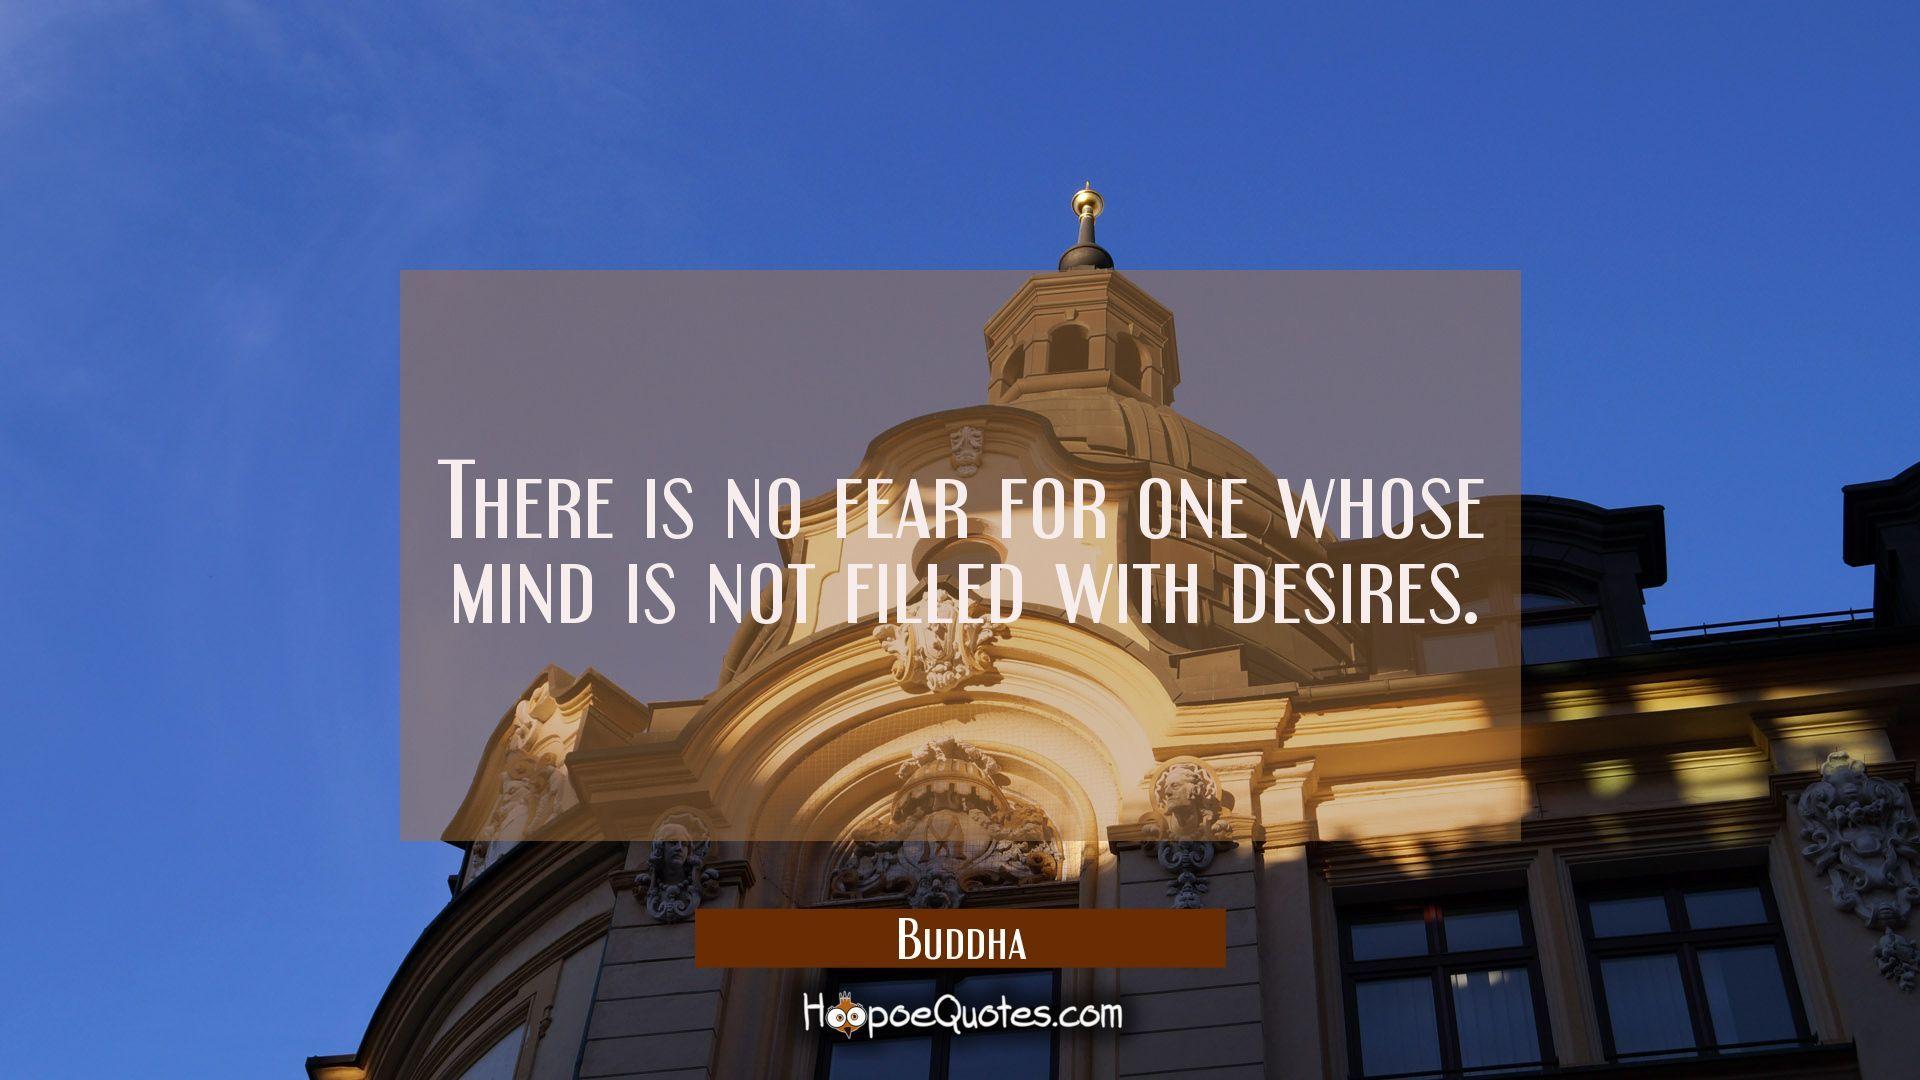 There is no fear for one whose mind is not filled with desires